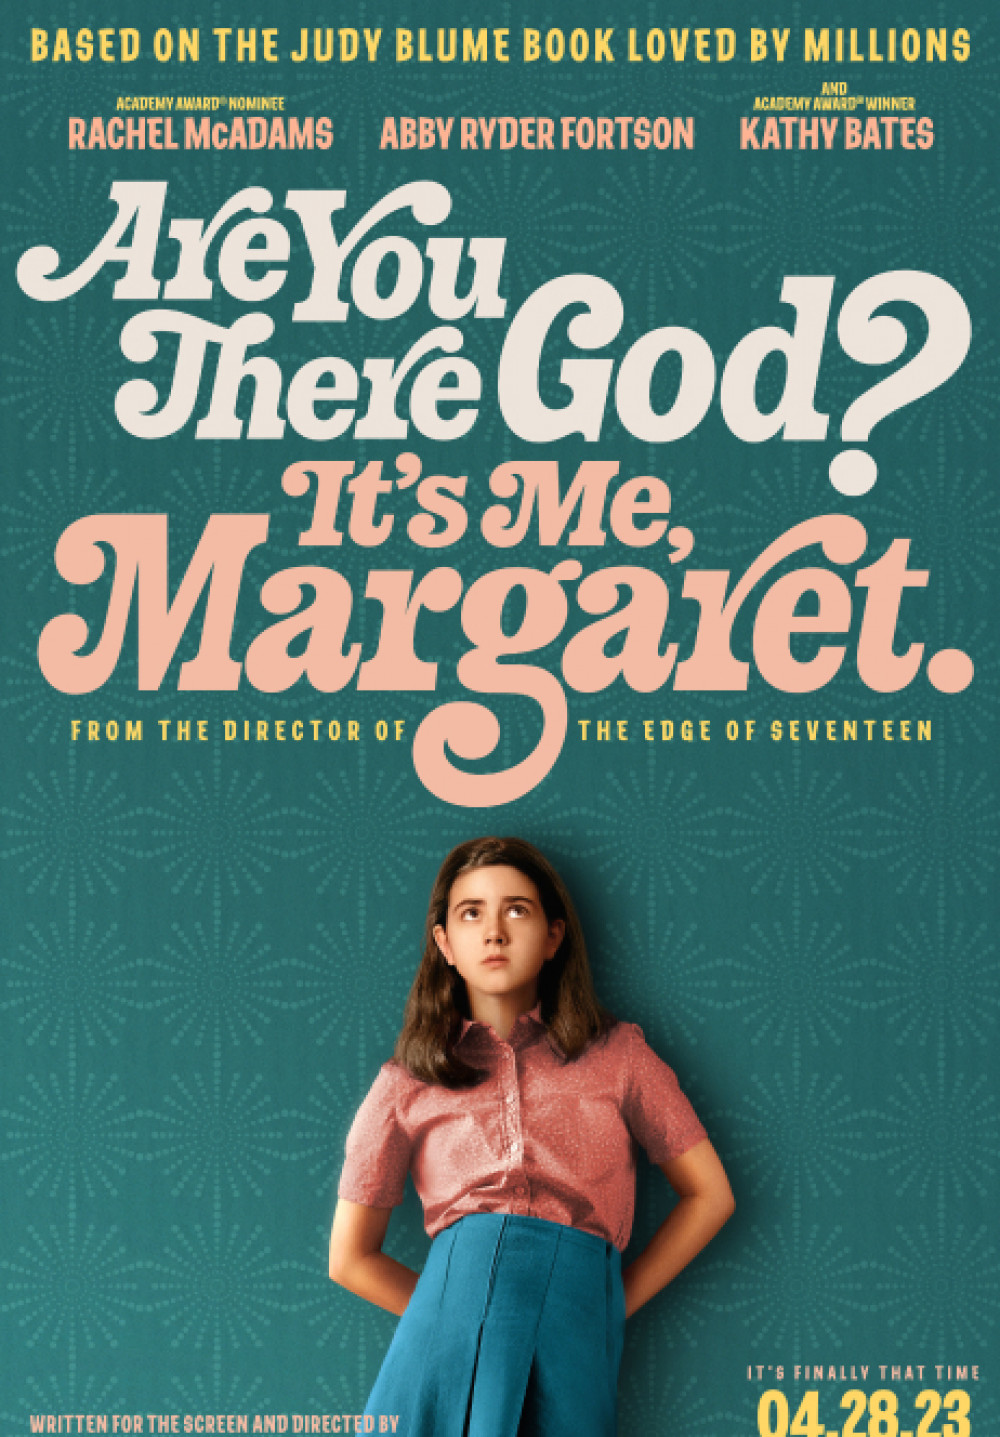 Richmond Film Society - Screening of 'Are you there God? It’s me, Margaret' (USA)